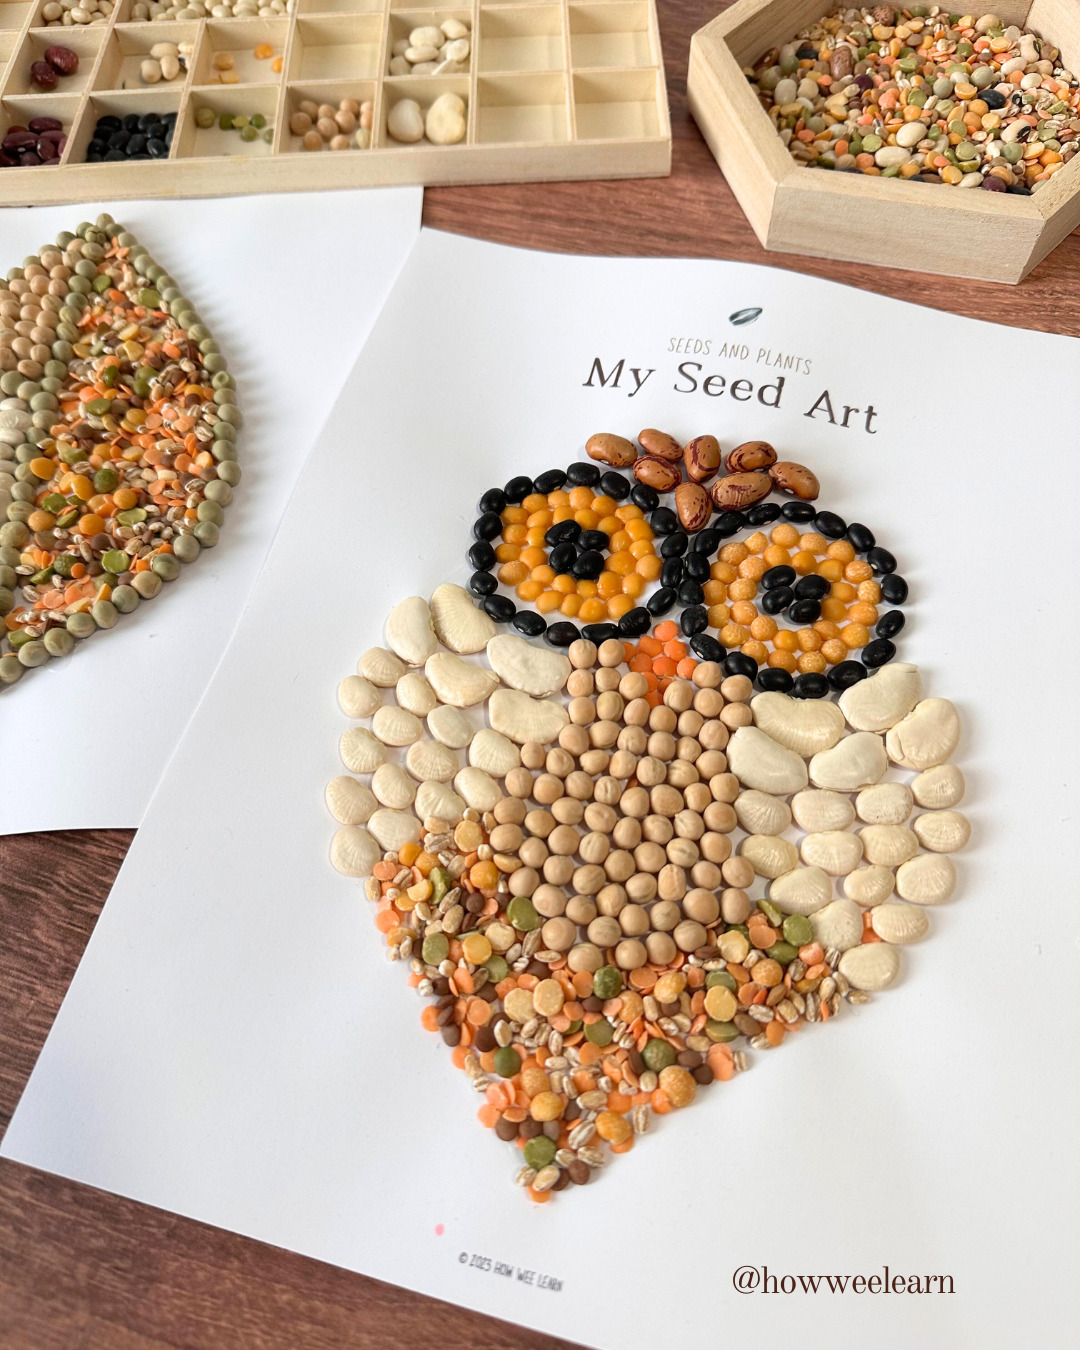 Seed Art from the Seeds and Plants Family Unit Study showing a finished seed owl